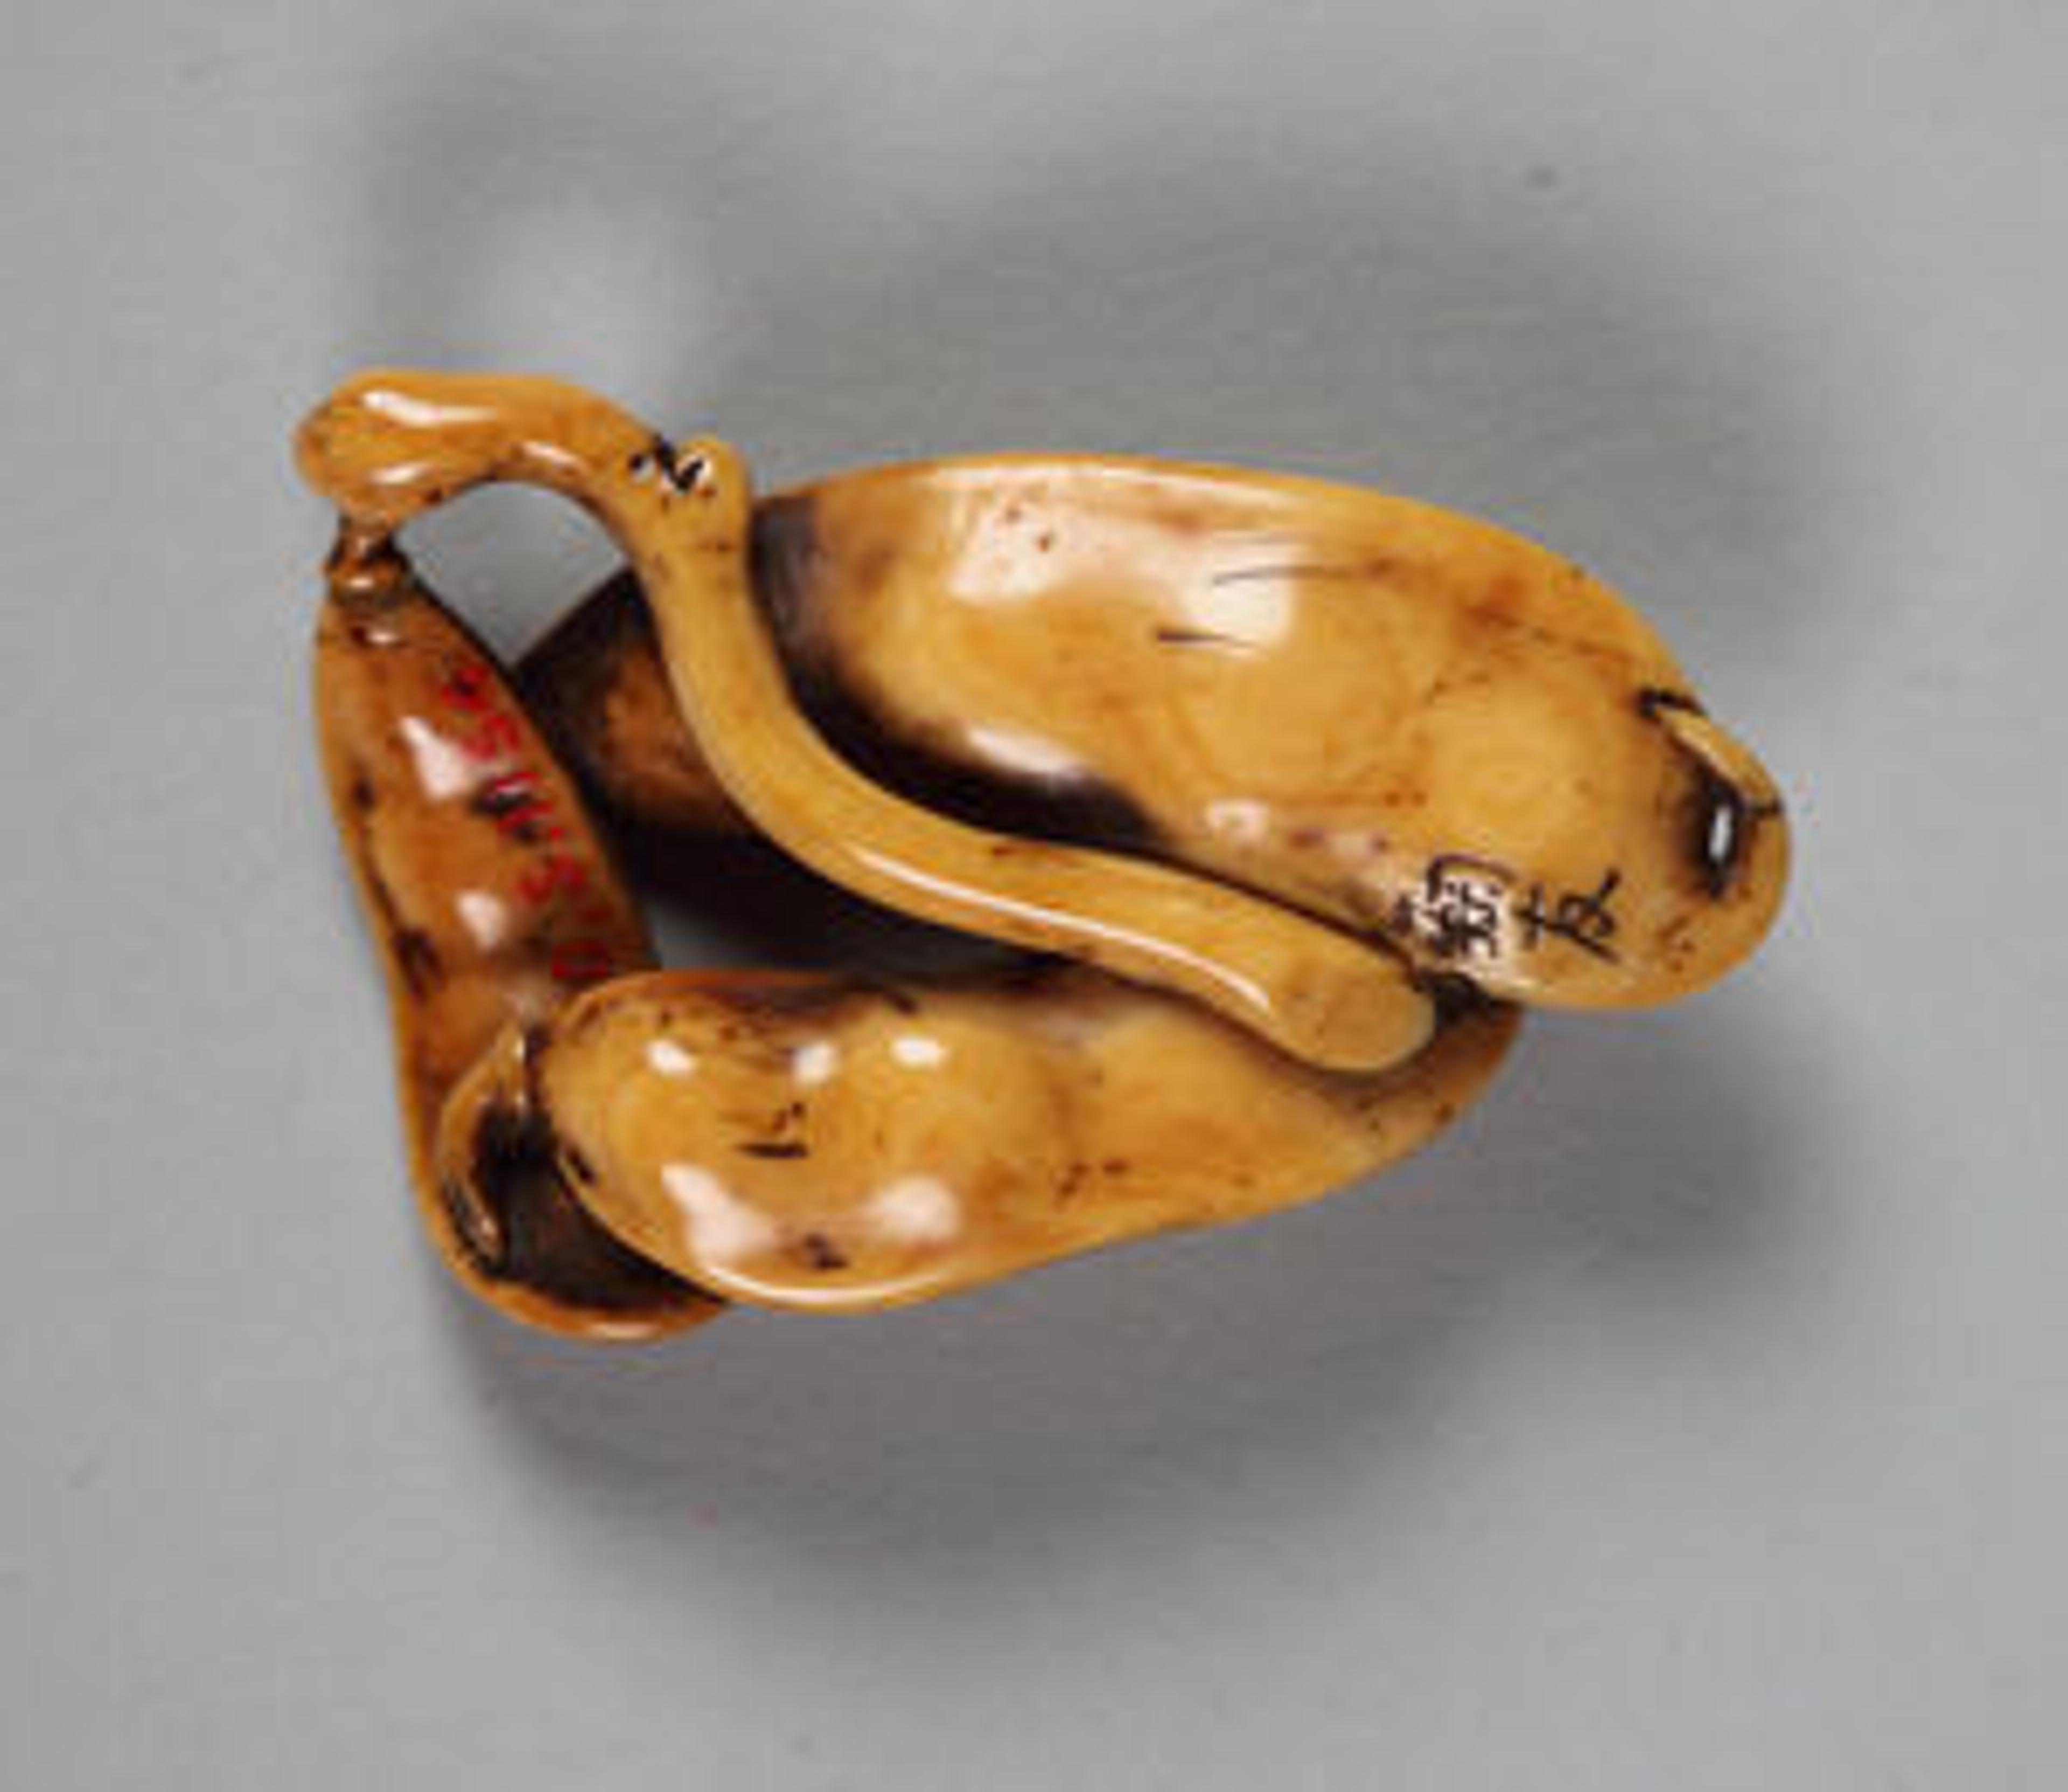 Edamame, late 18th–early 19th century | 10.211.1154